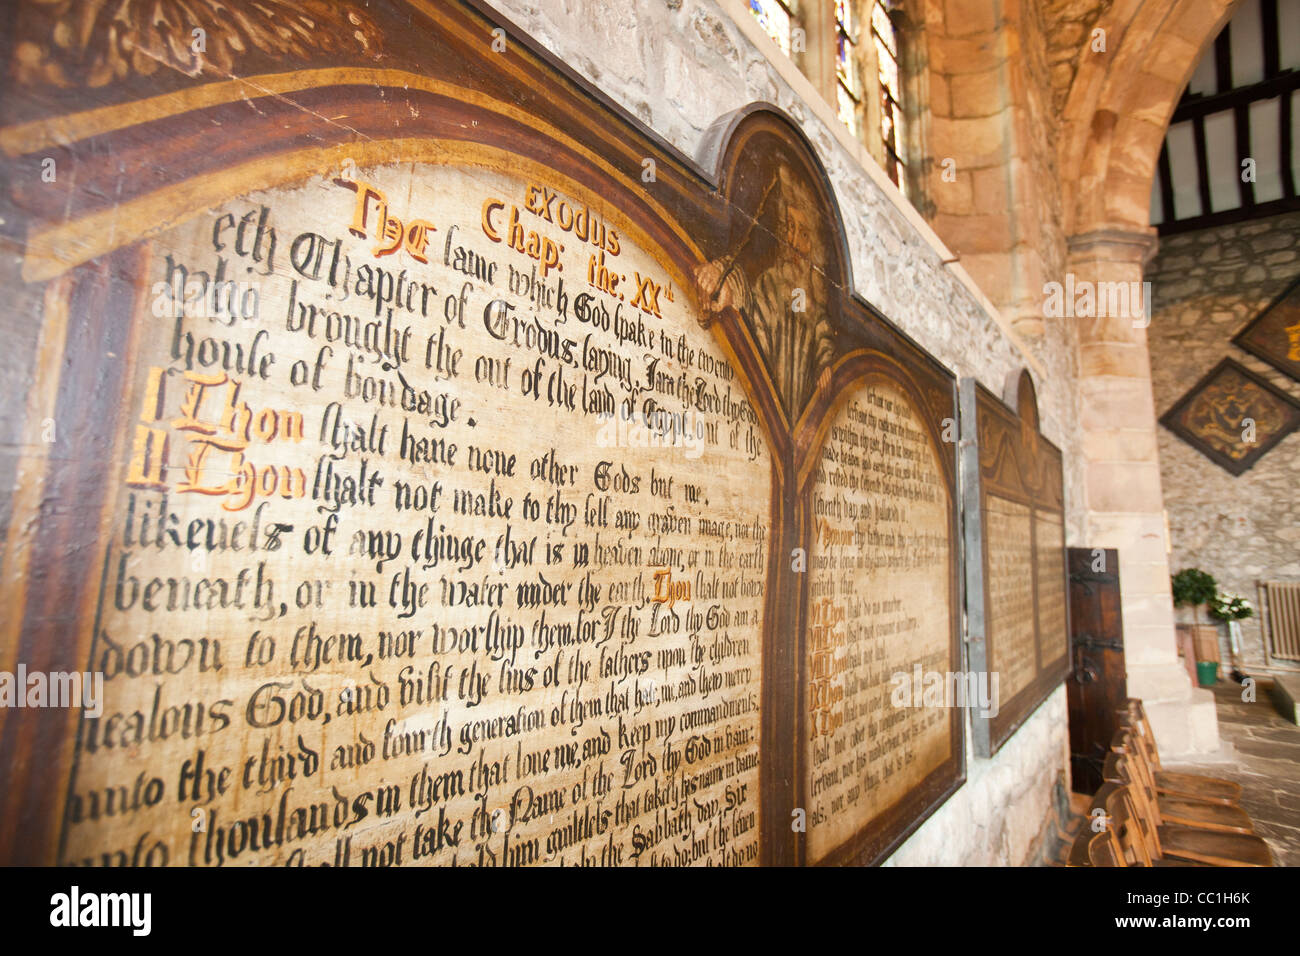 Ancient Exodus text in at Cartmell Priory, Cark in Cartmell, Cumbria, UK. Stock Photo